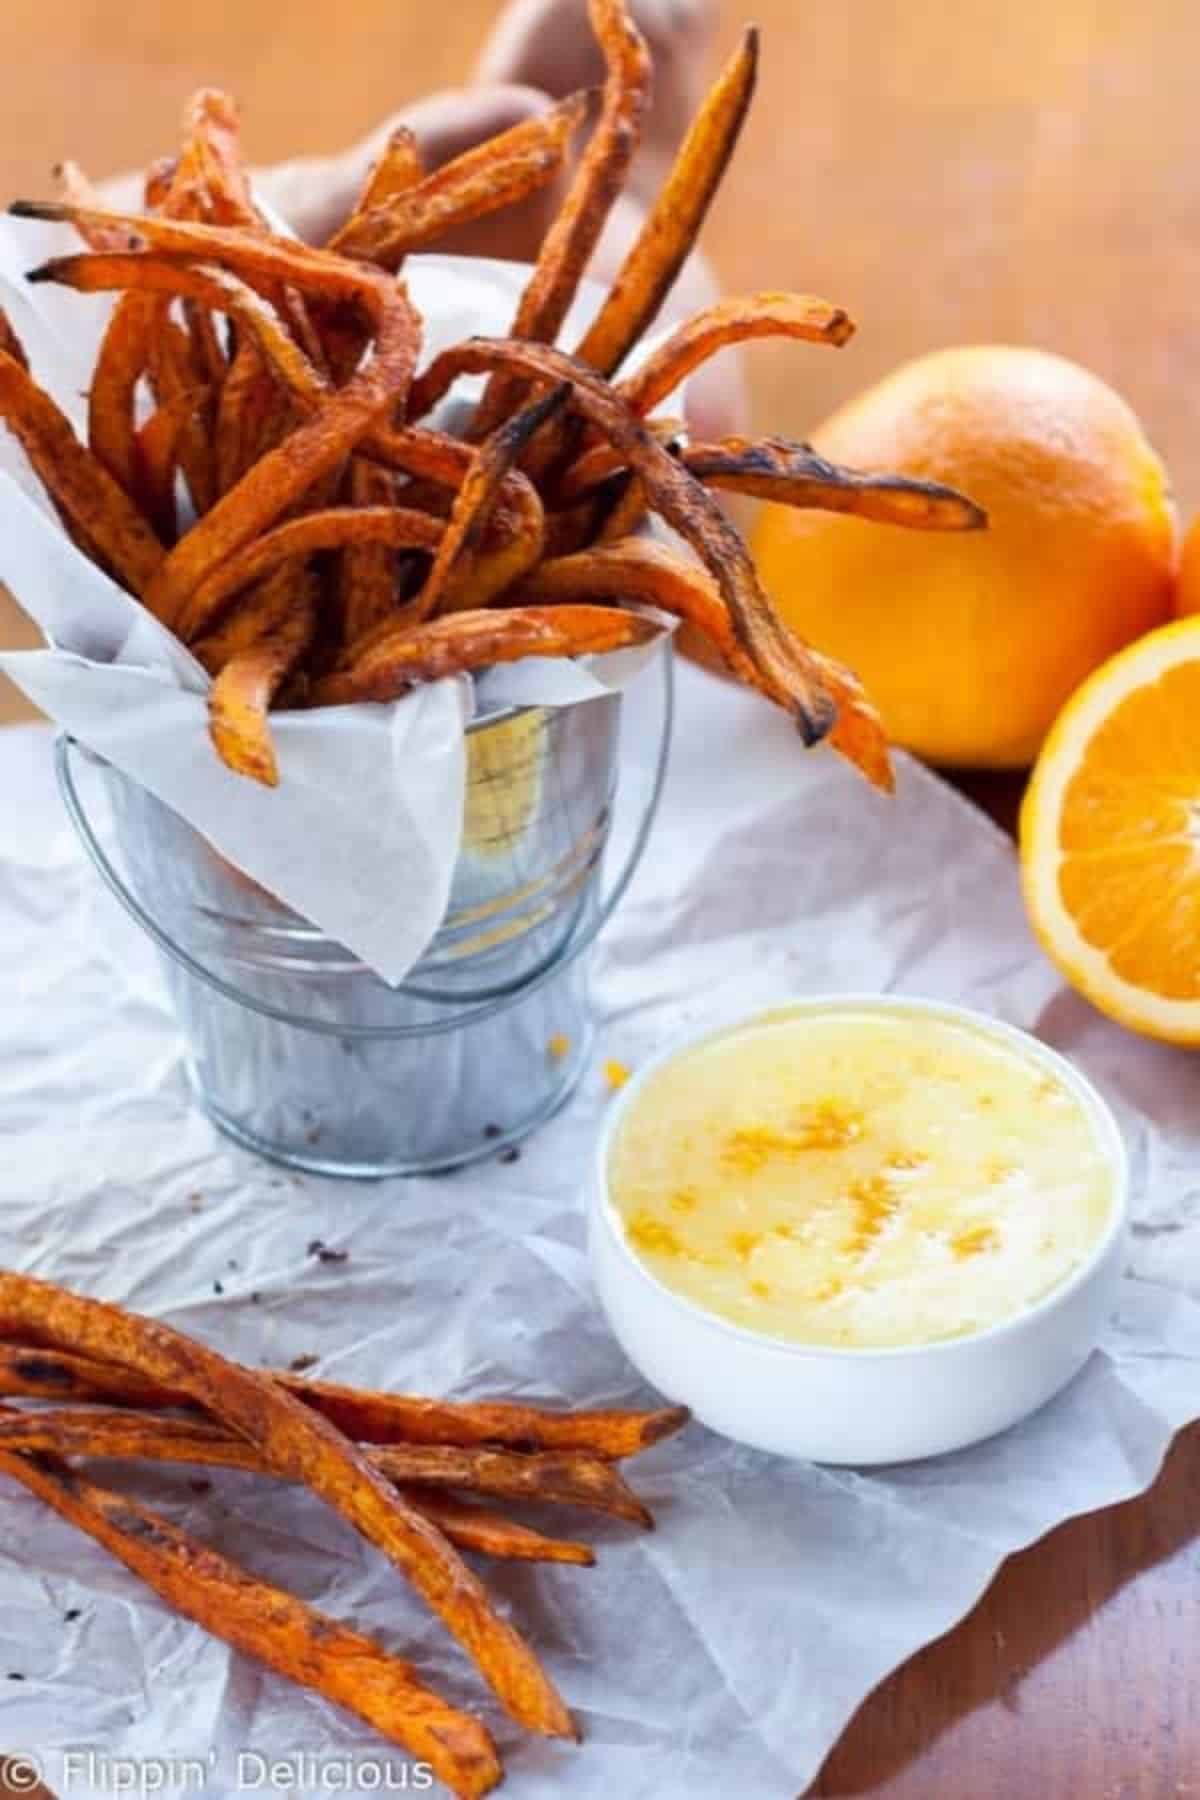 Crispy Baked Sweet Potato Fries with Orange Zest Icing Dipping Sauce